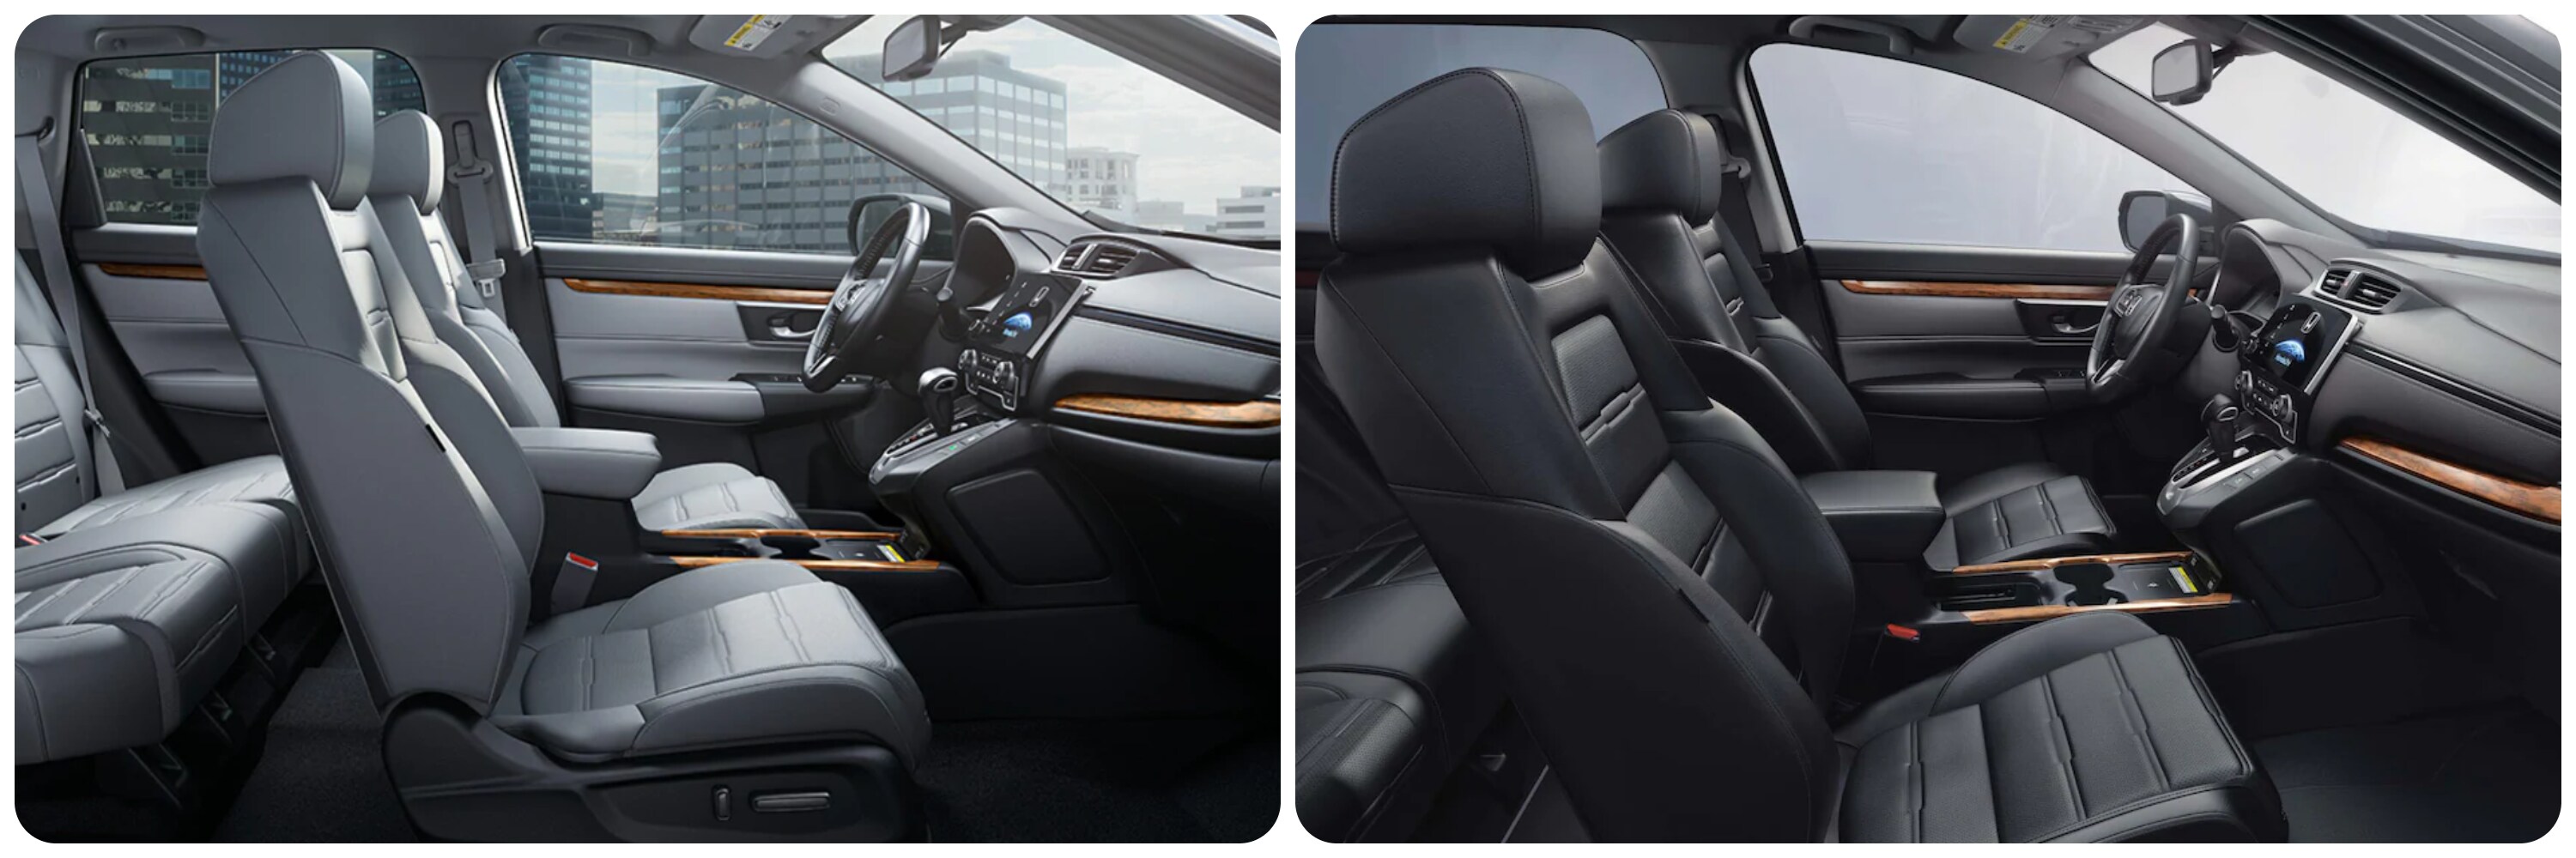 On the left the cabin of a 2022 Honda CR-V with gray leather upholstery and a black dash and burled wood accents. On the right a view of the 2021 Honda CR-V with all black interior with burled wood accents